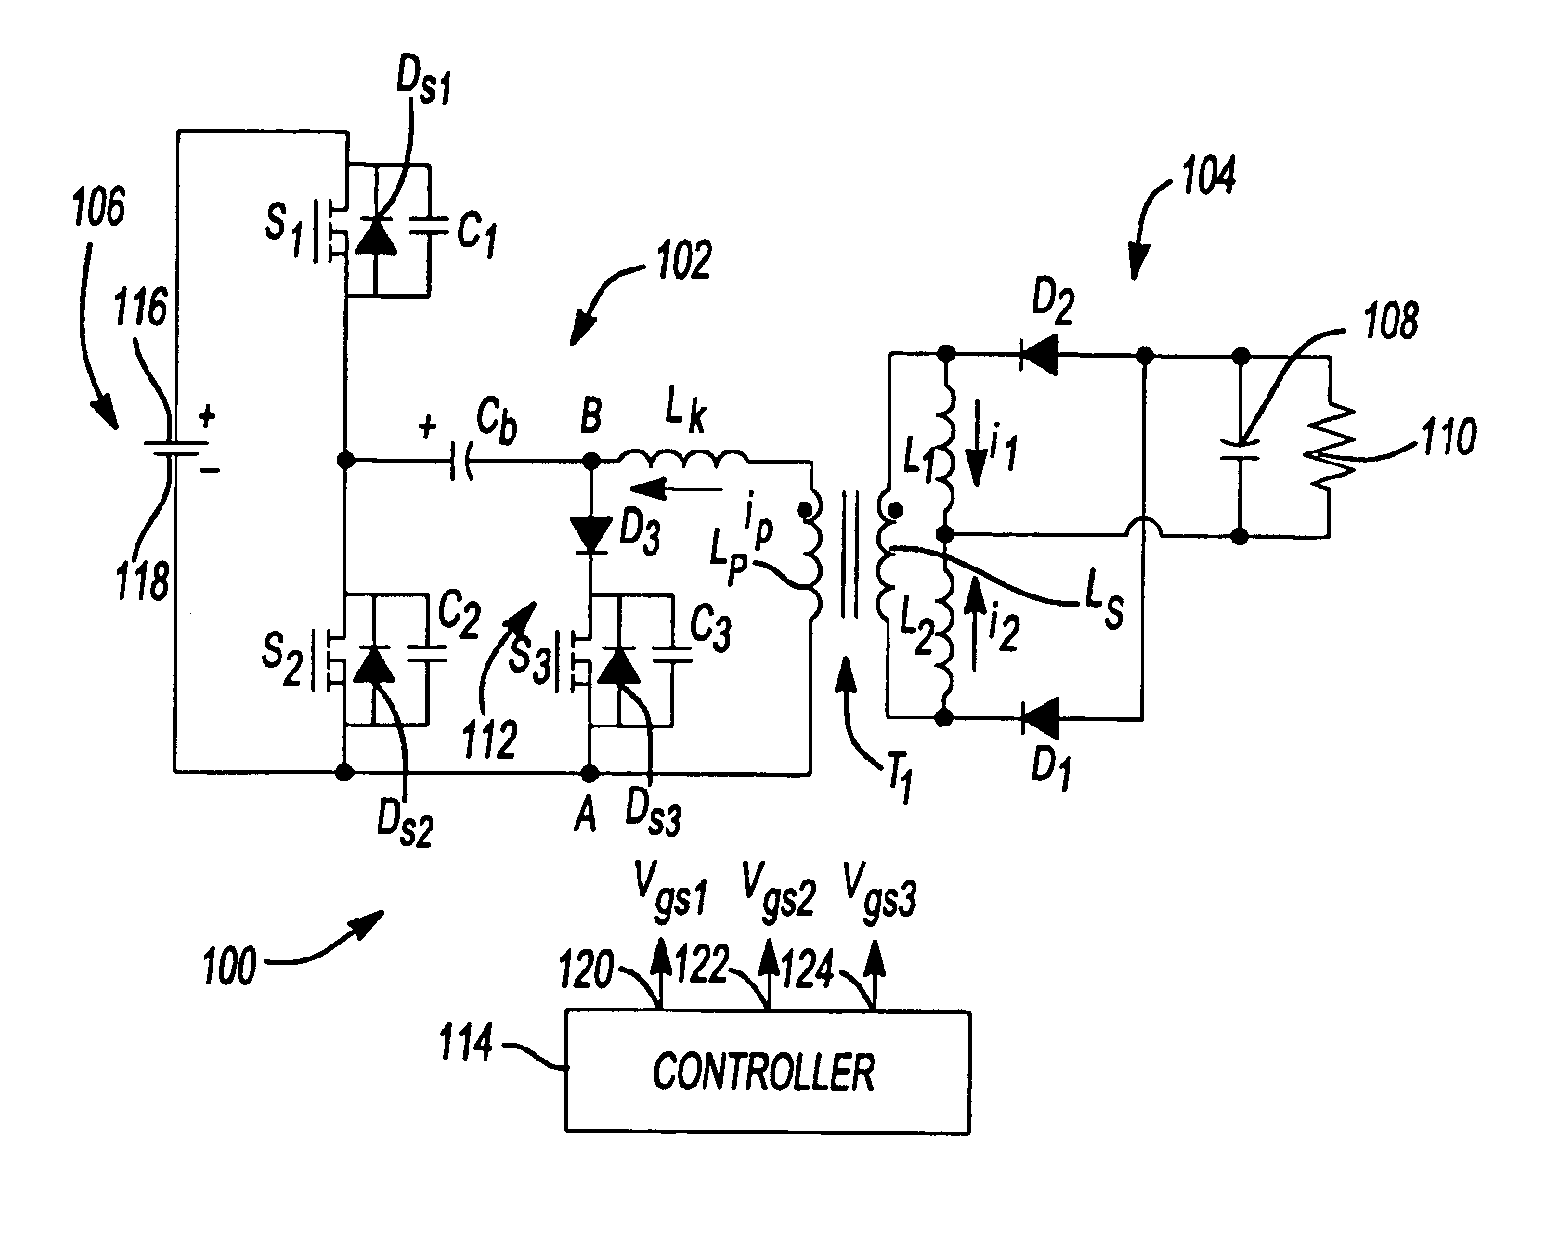 Zero-voltage switching half-bridge DC-DC converter topology by utilizing the transformer leakage inductance trapped energy